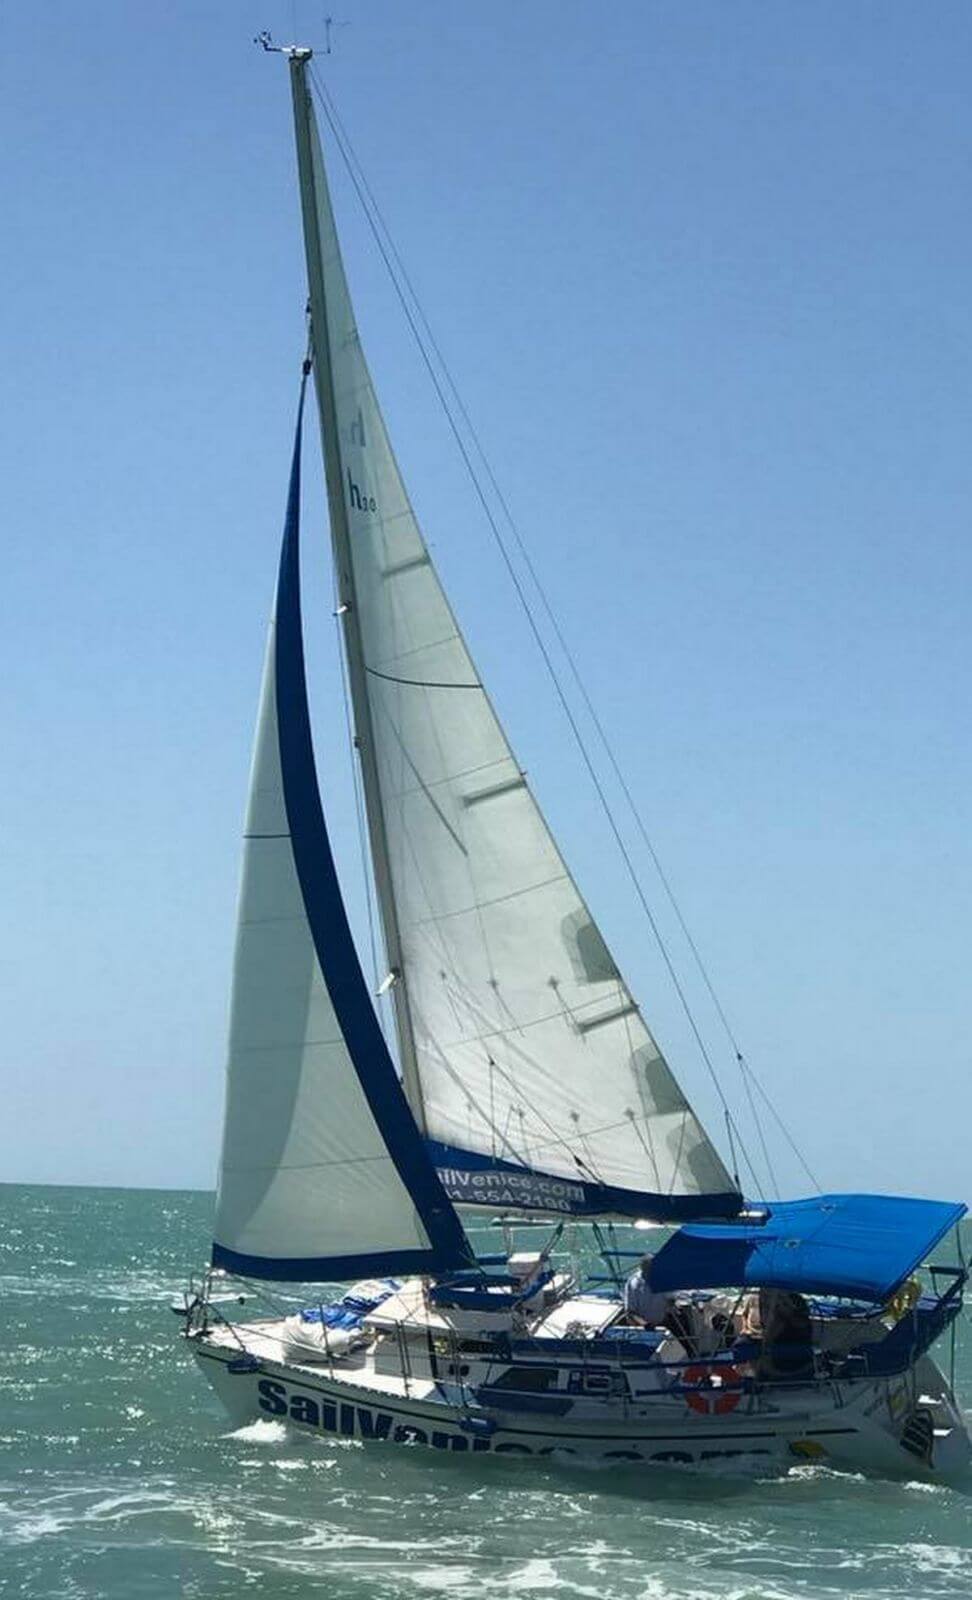 Sail Venice boat on the Gulf of Mexico. Fun and relaxing private sightseeing and wildlife sailing cruises in Venice, Florida. Children and dog friendly. 